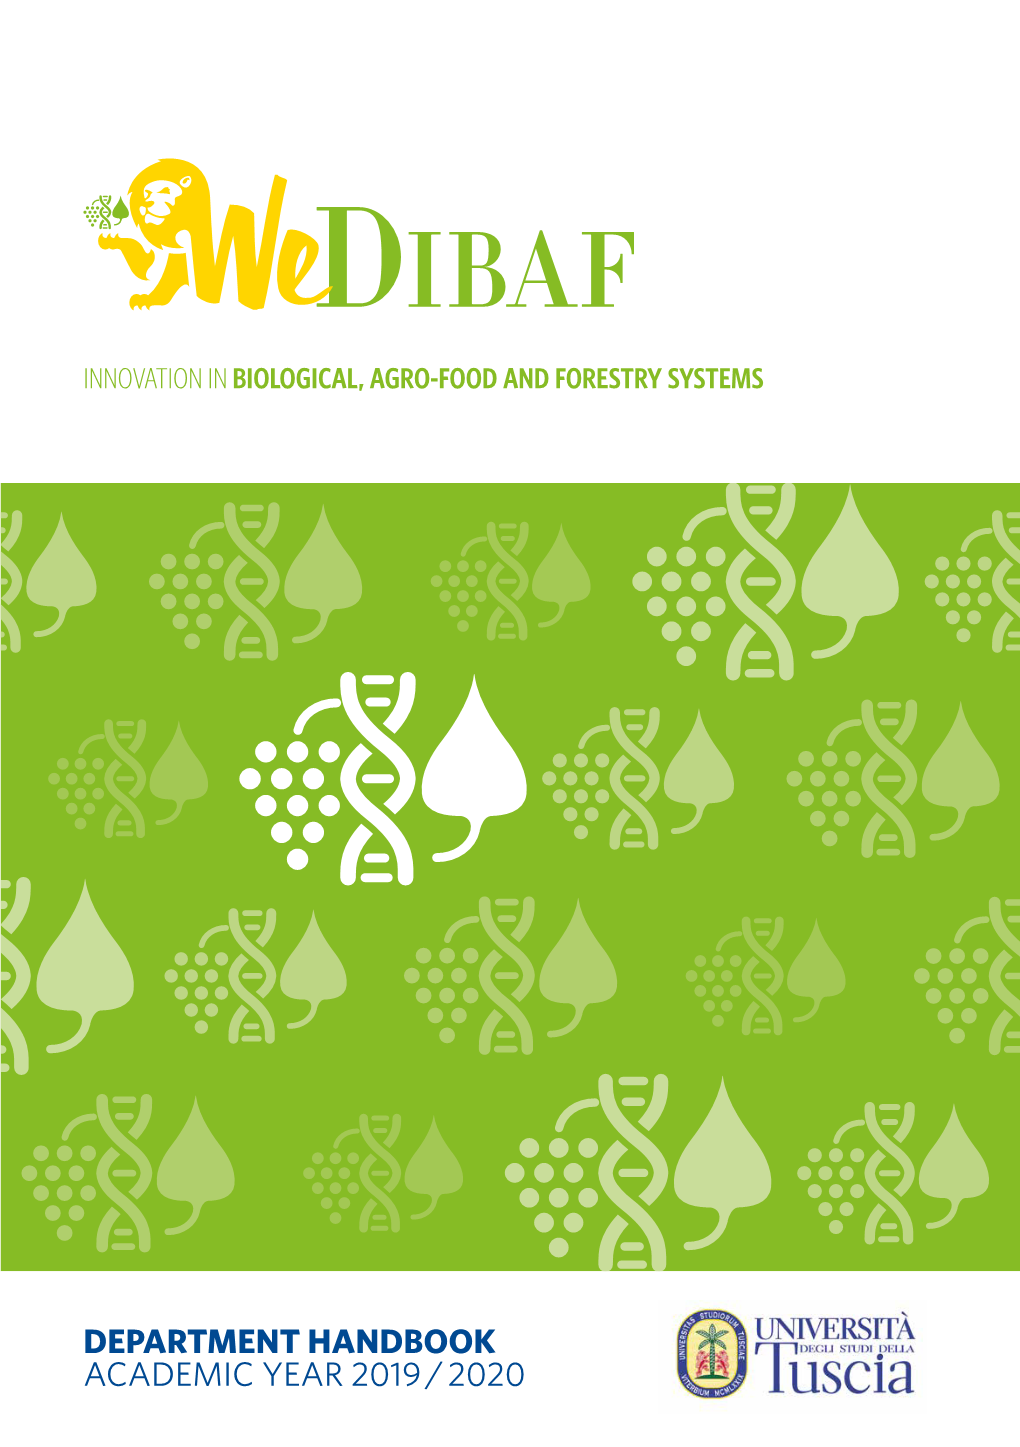 Department Handbook Academic Year 2019 / 2020 Dibaf Innovation in Biological, Agro-Food and Forestry Systems